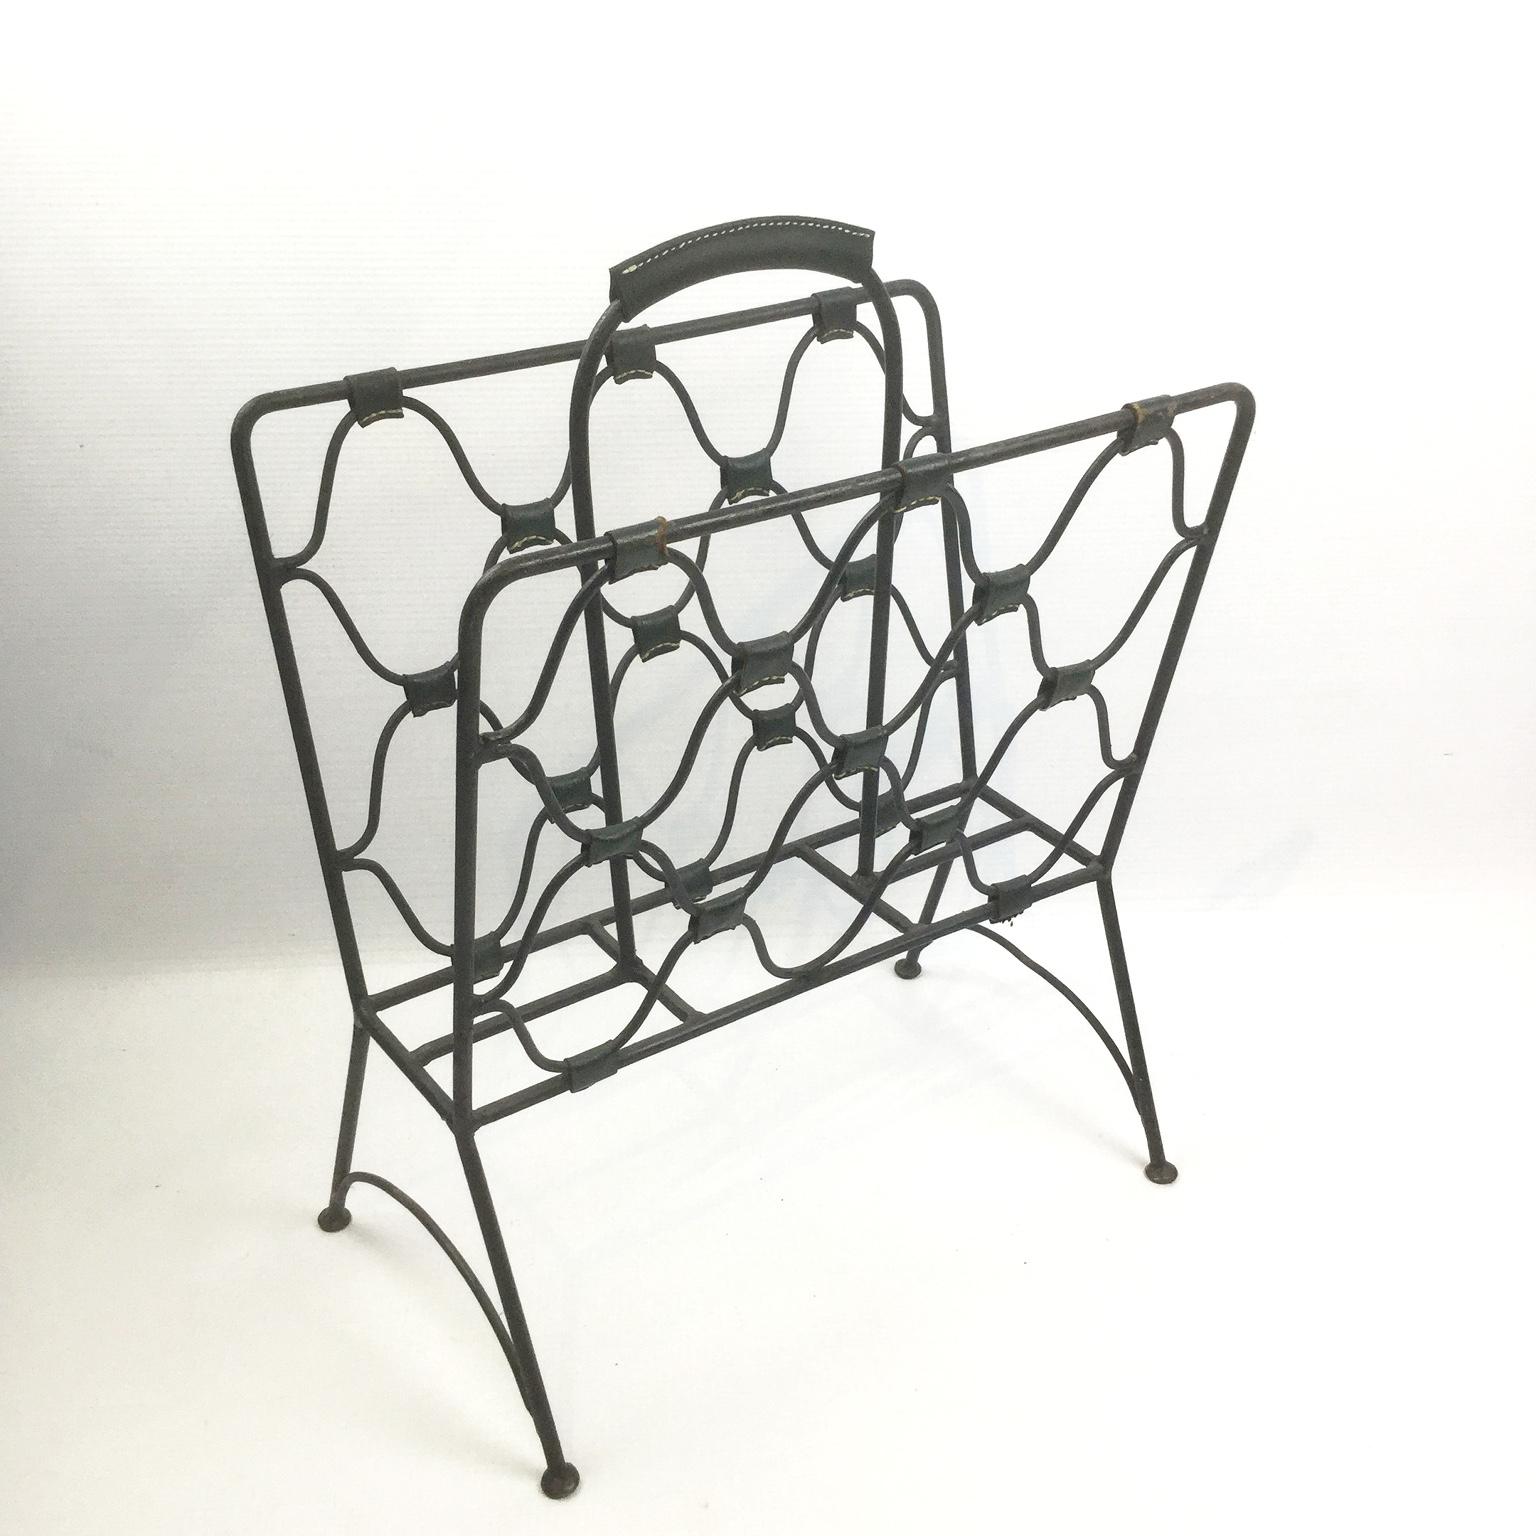 Mid-Century Modern Jacques Adnet Magazine Rack in Wrought Iron and Green Leather from the 1940s For Sale